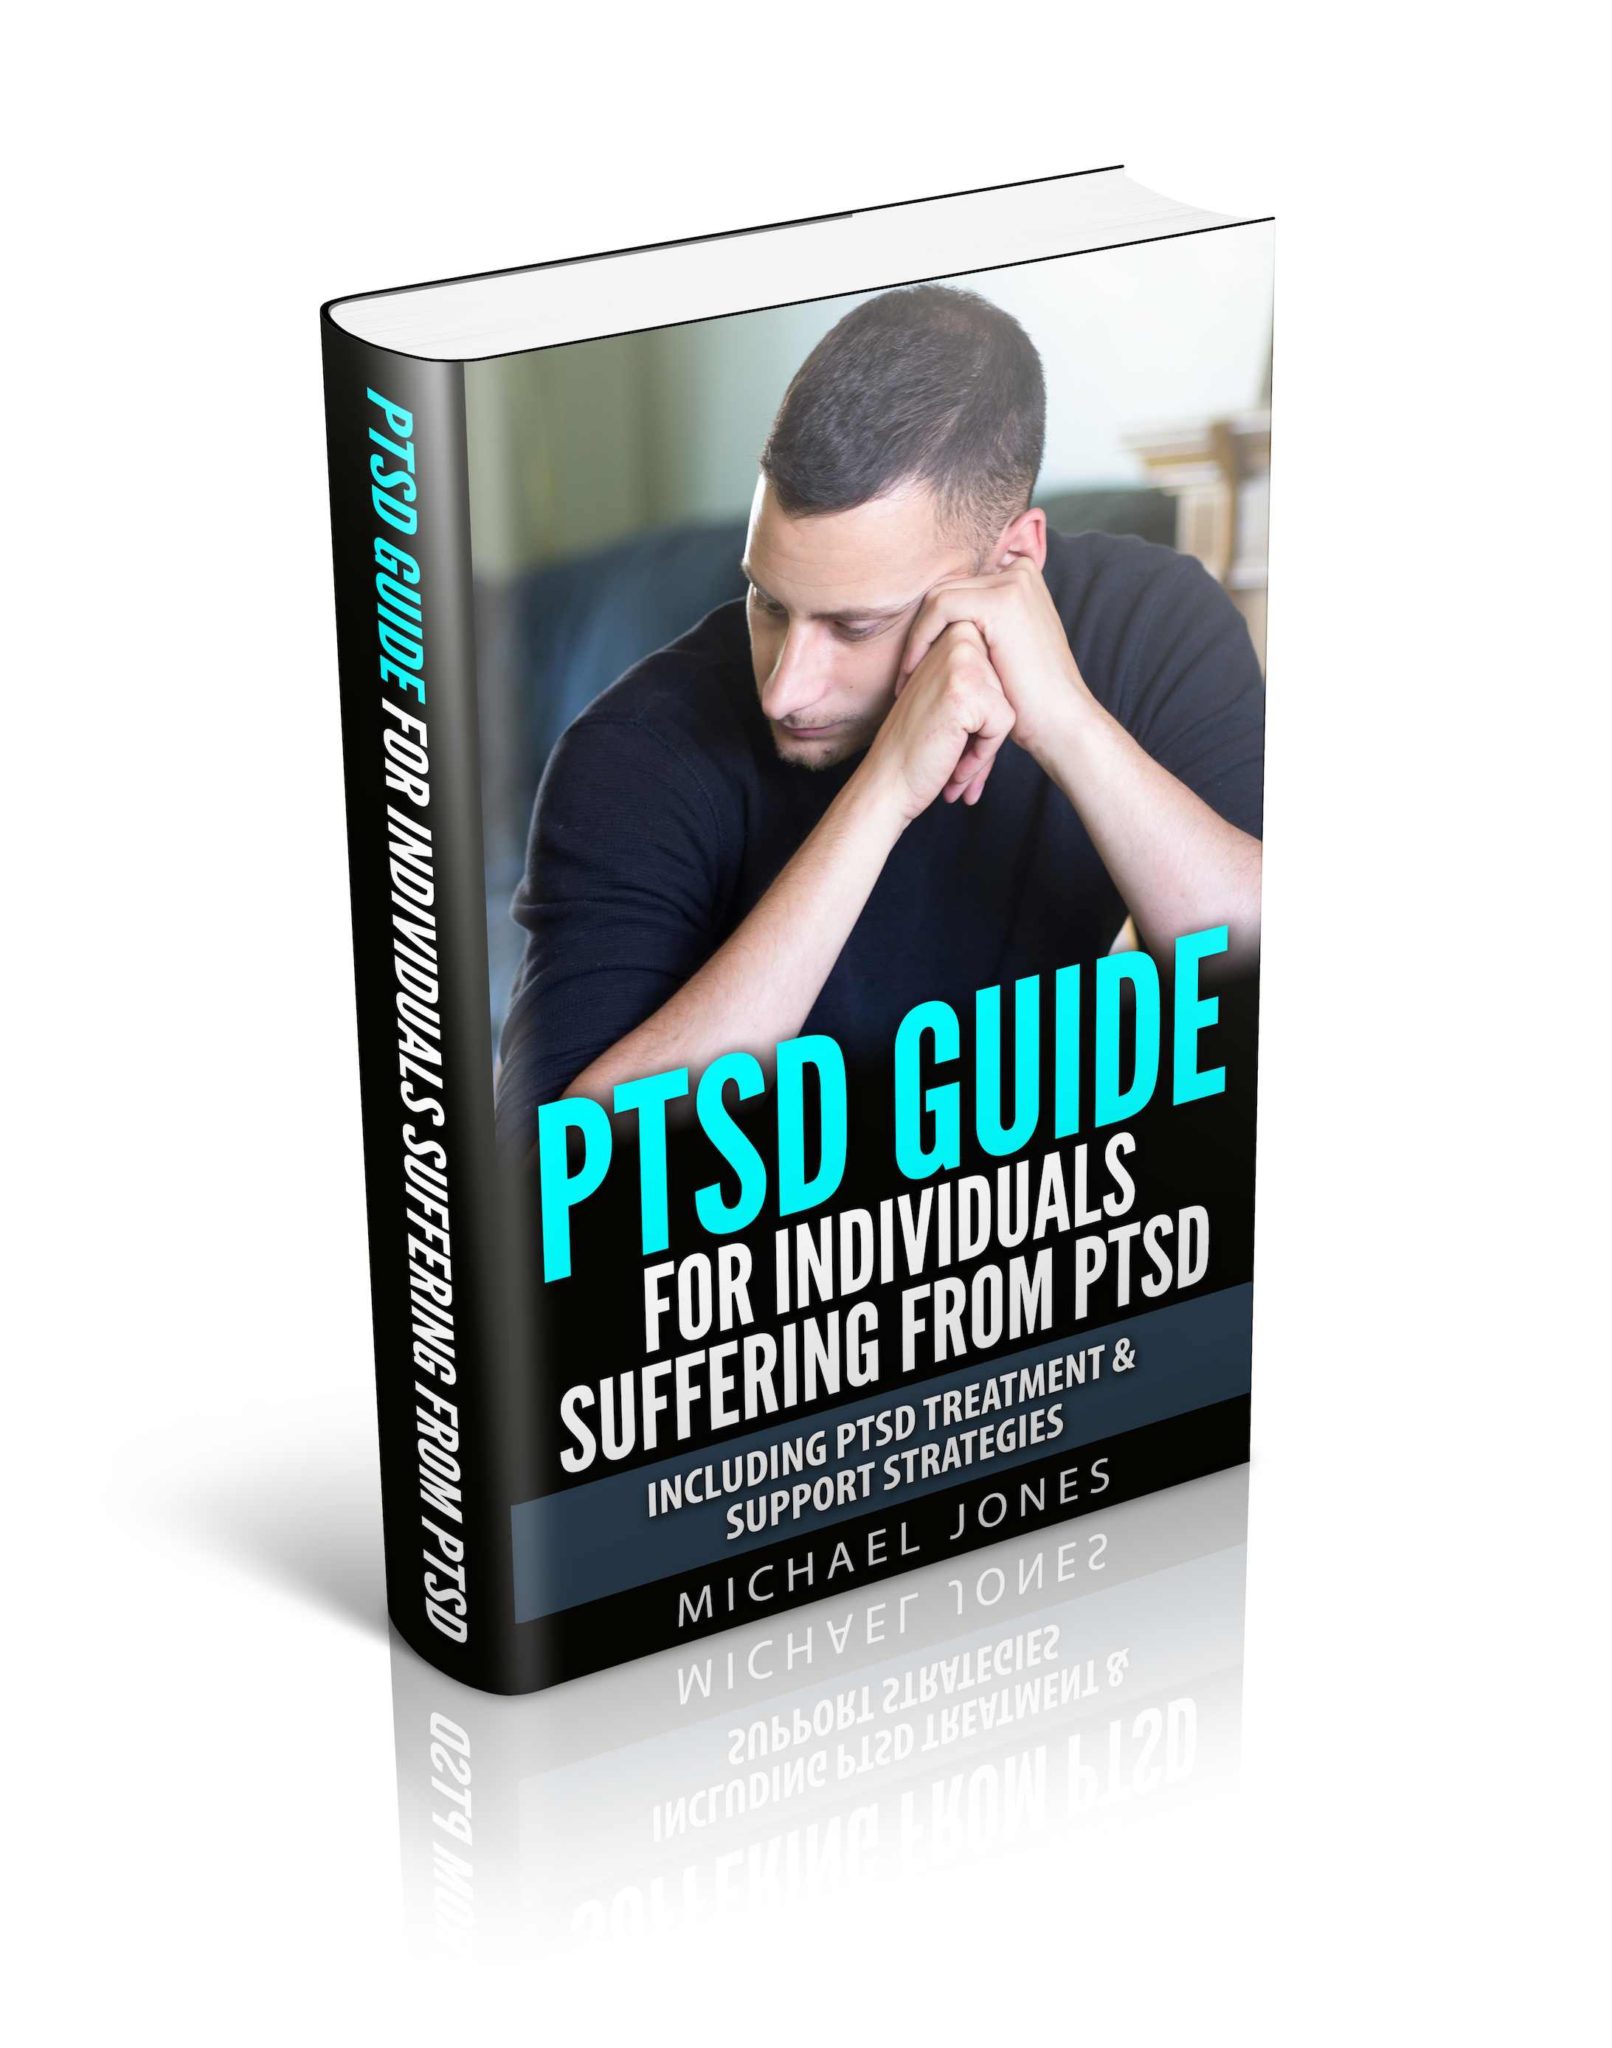 PTSD Guide For Individuals Suffering From Post Traumatic Stress Disorder: Including PTSD Treatment & Support Strategies by Michael Jones